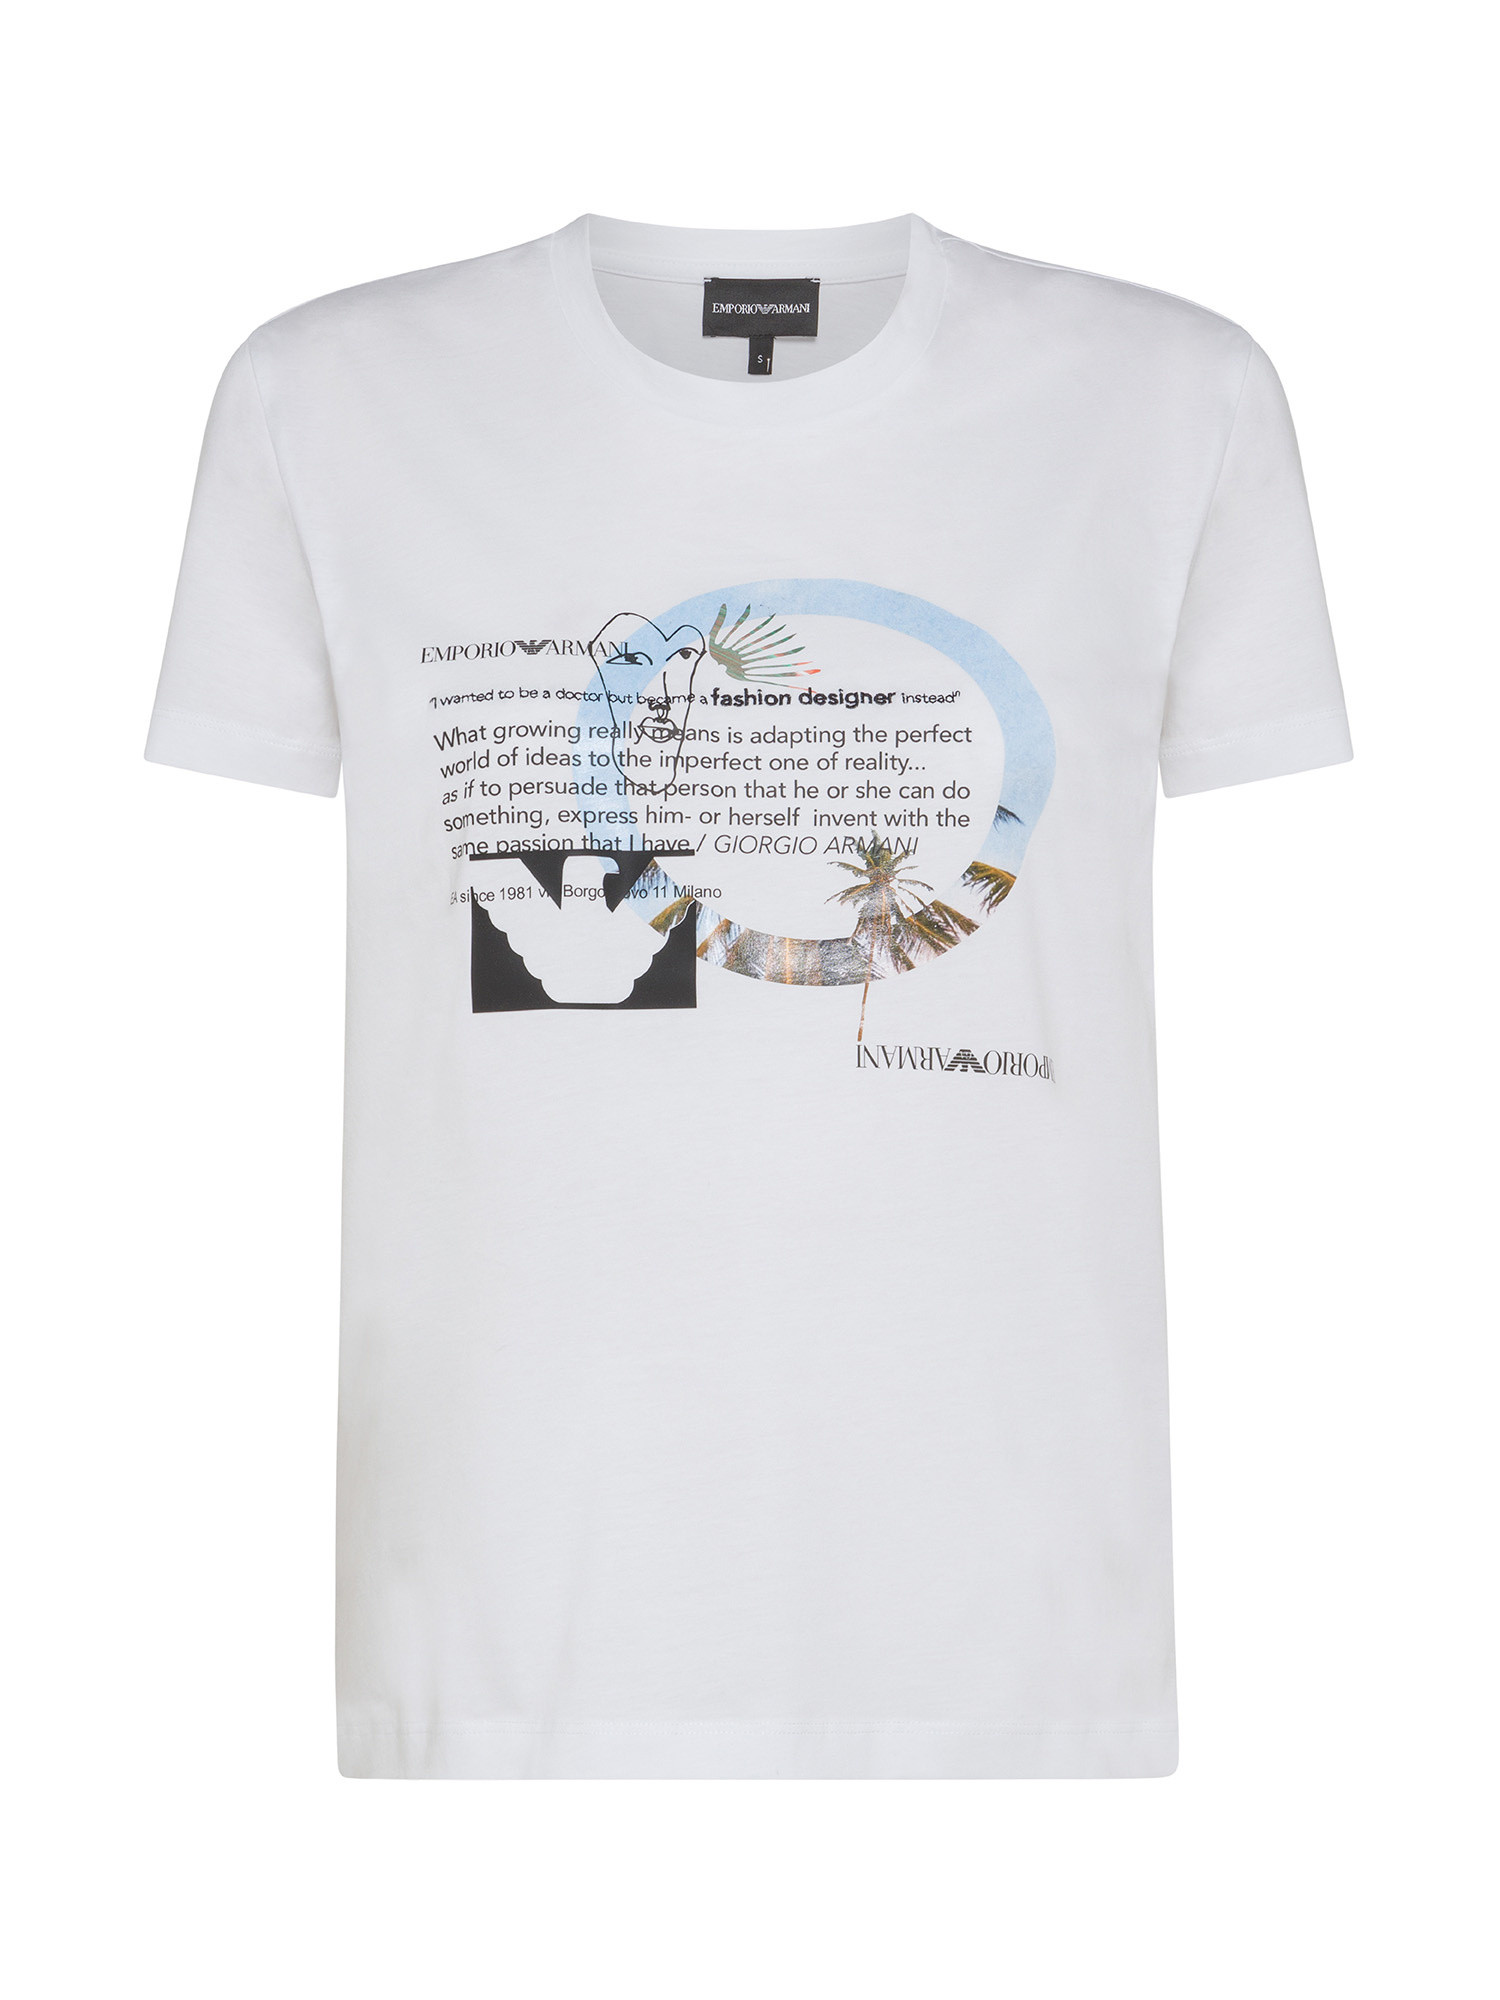 Emporio Armani - T-shirt in cotone con stampa, Bianco, large image number 0